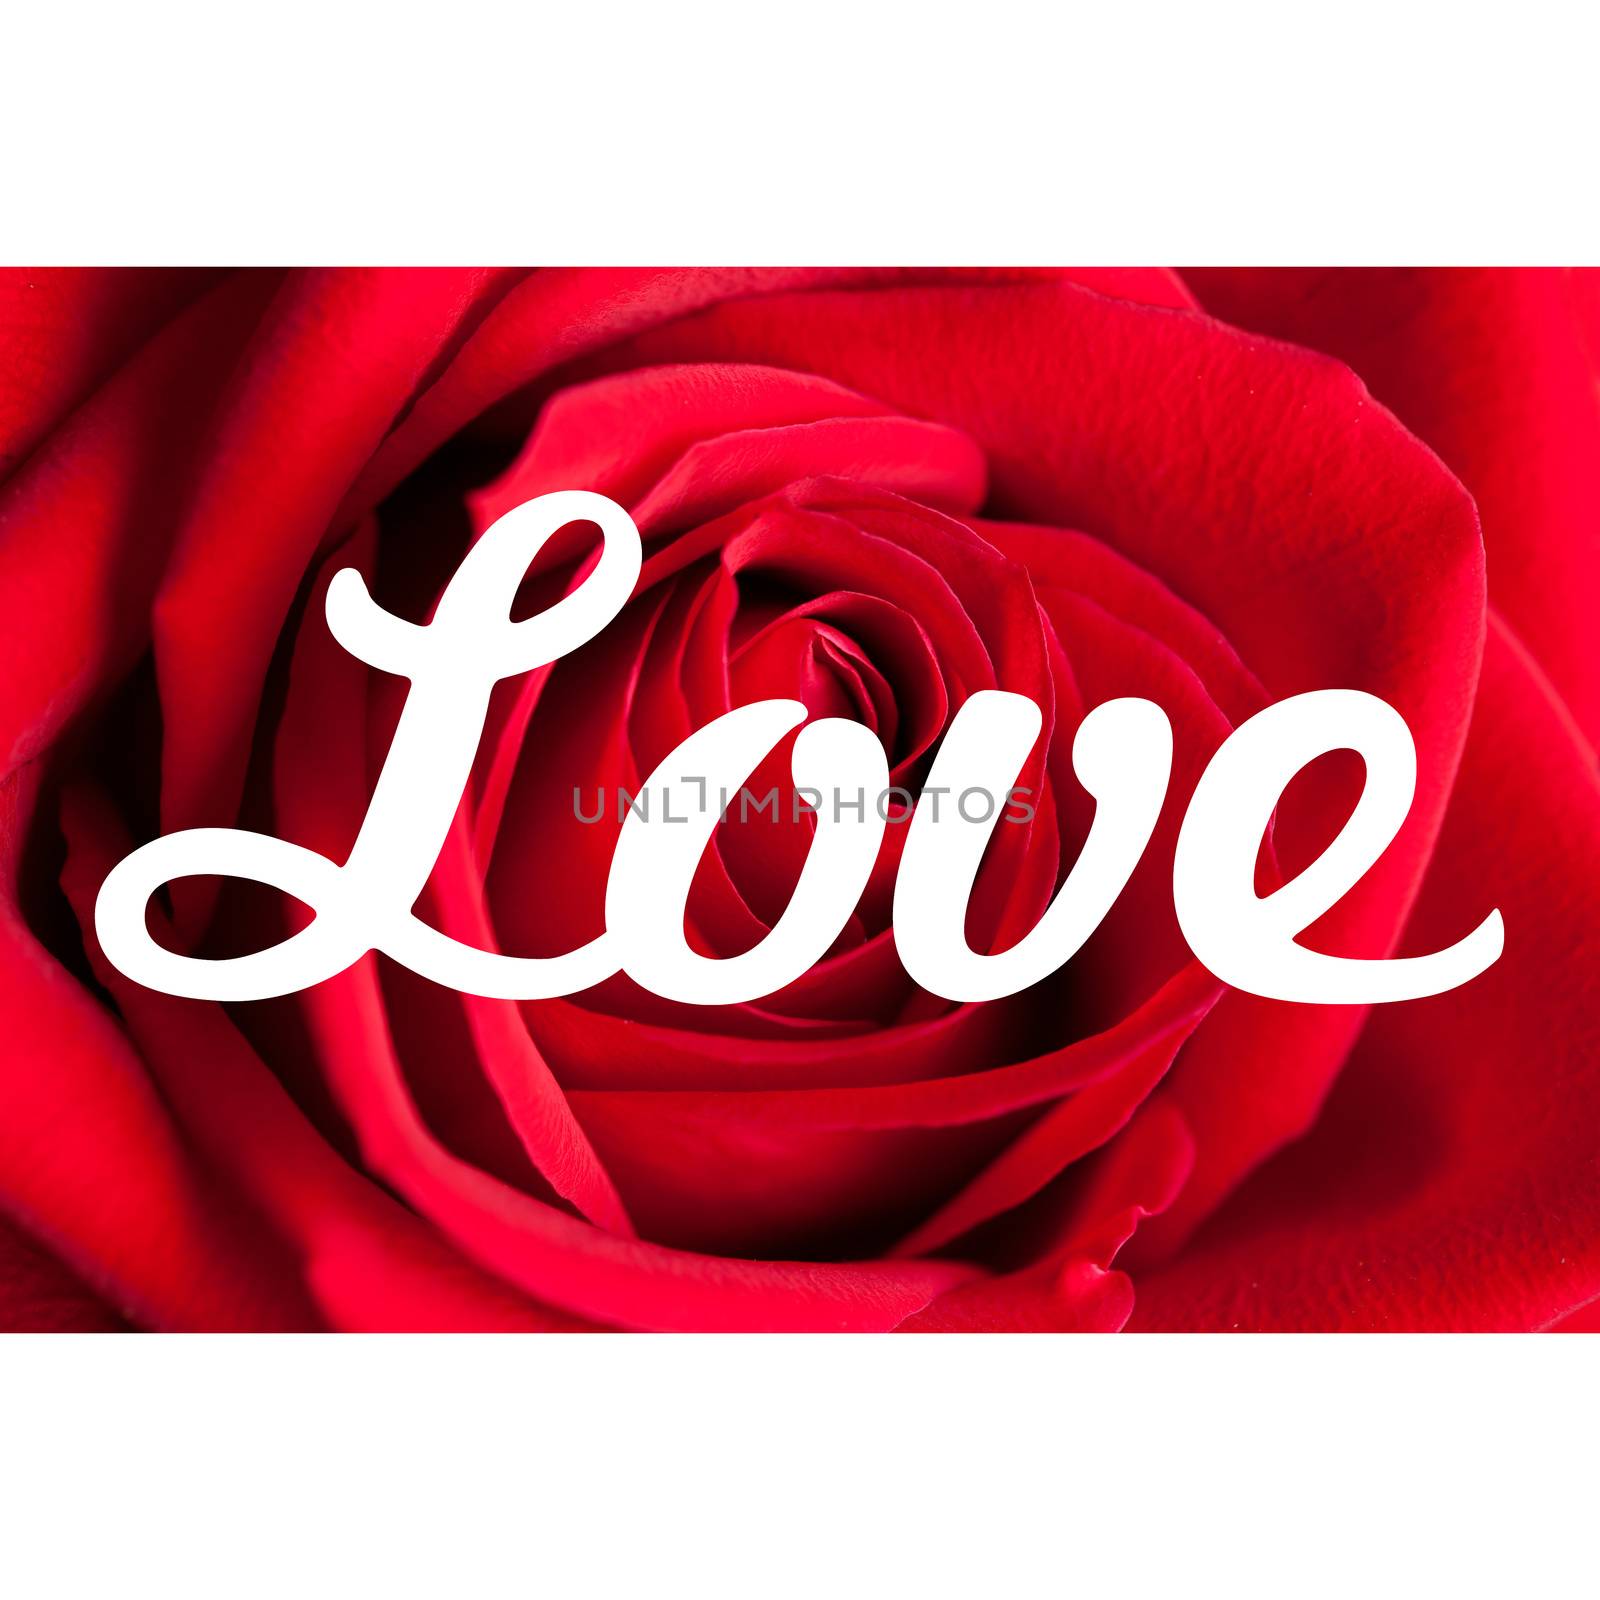 Love typography background with rose petals and white borders.